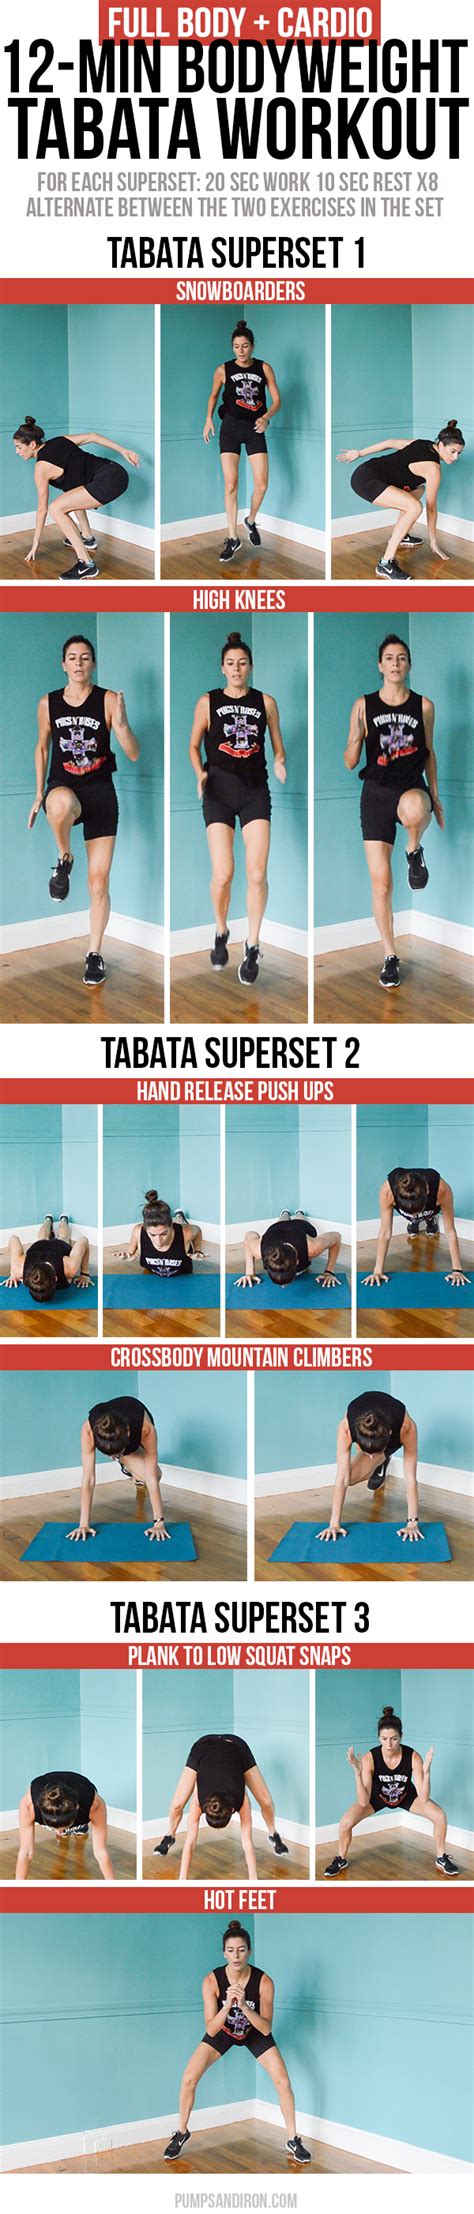 12 Minute Bodyweight Tabata Workout Series Full Body Cardio Pumps